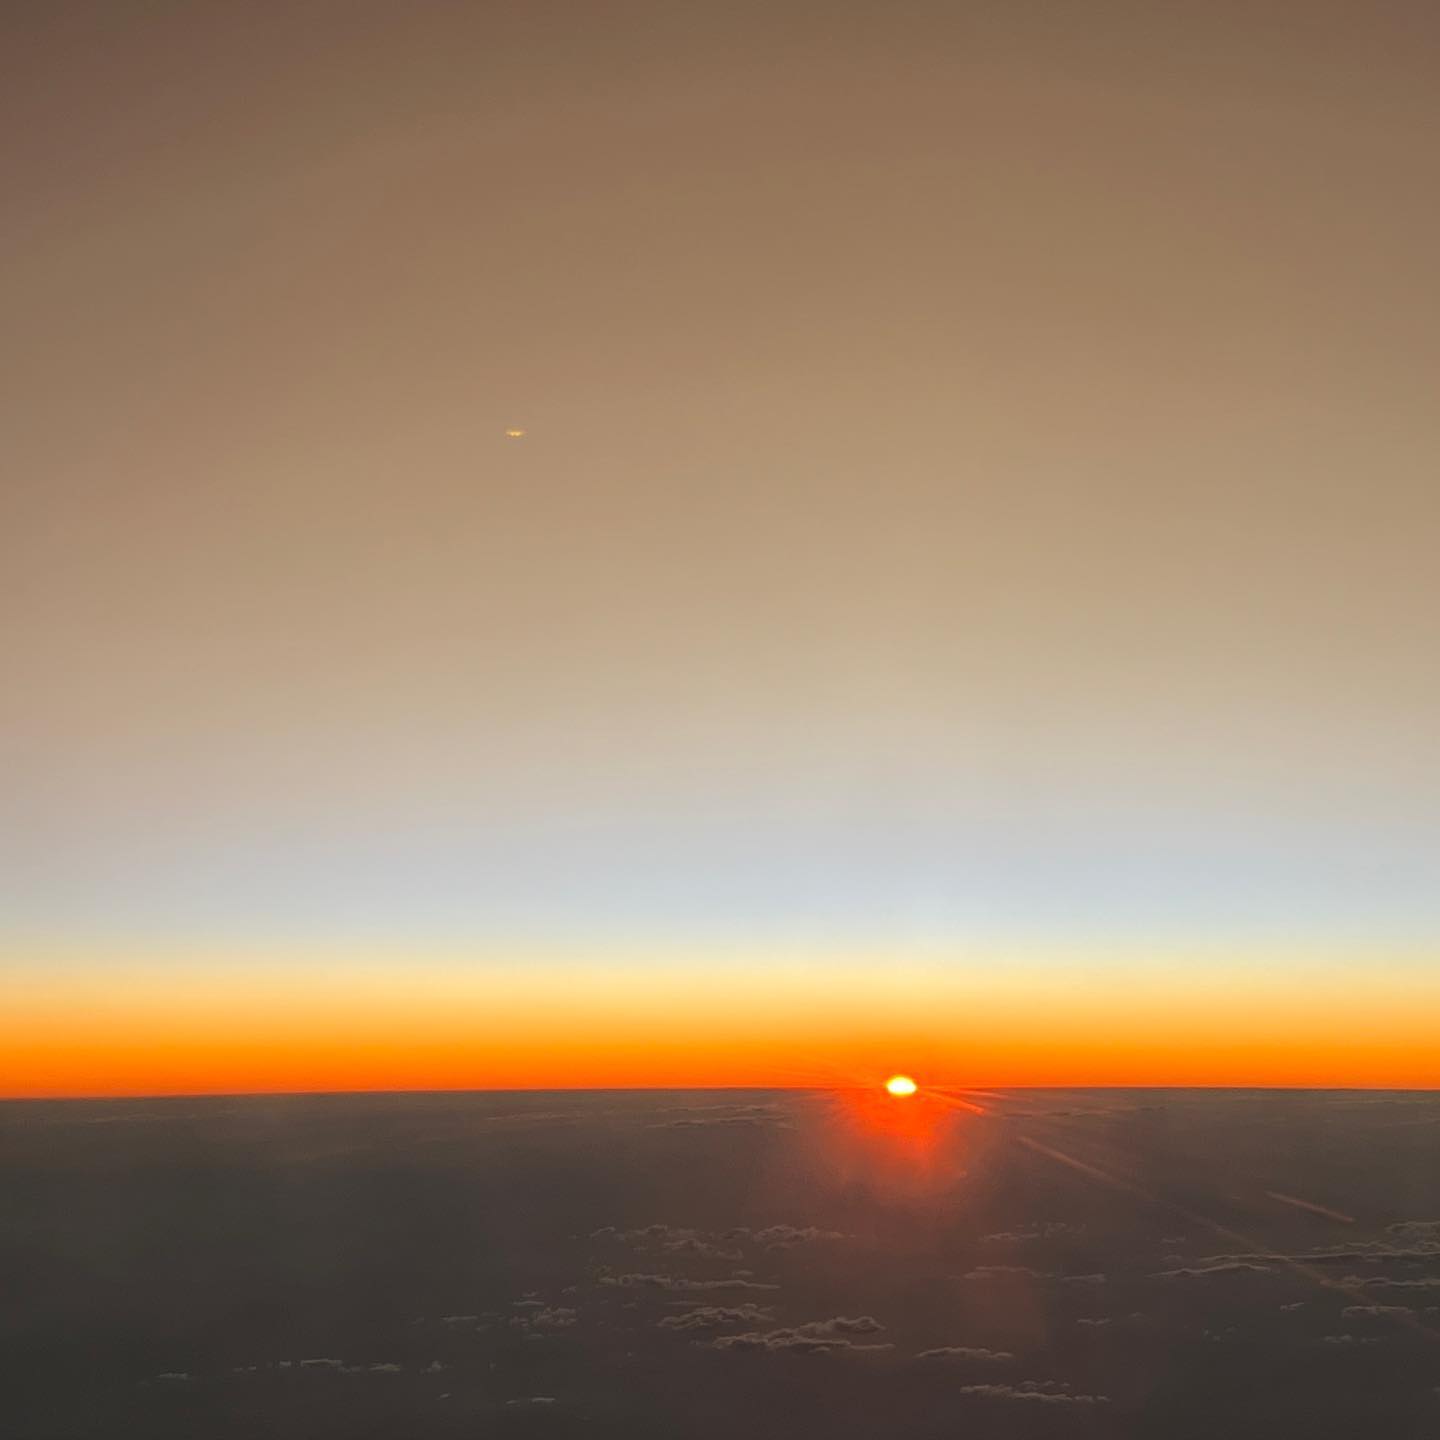 Flying in Johannesburg at sunset was a stunning experience. Watching the sun slip beneath the horizon and all the colours of the sky. #johannesburg #sunset #landed